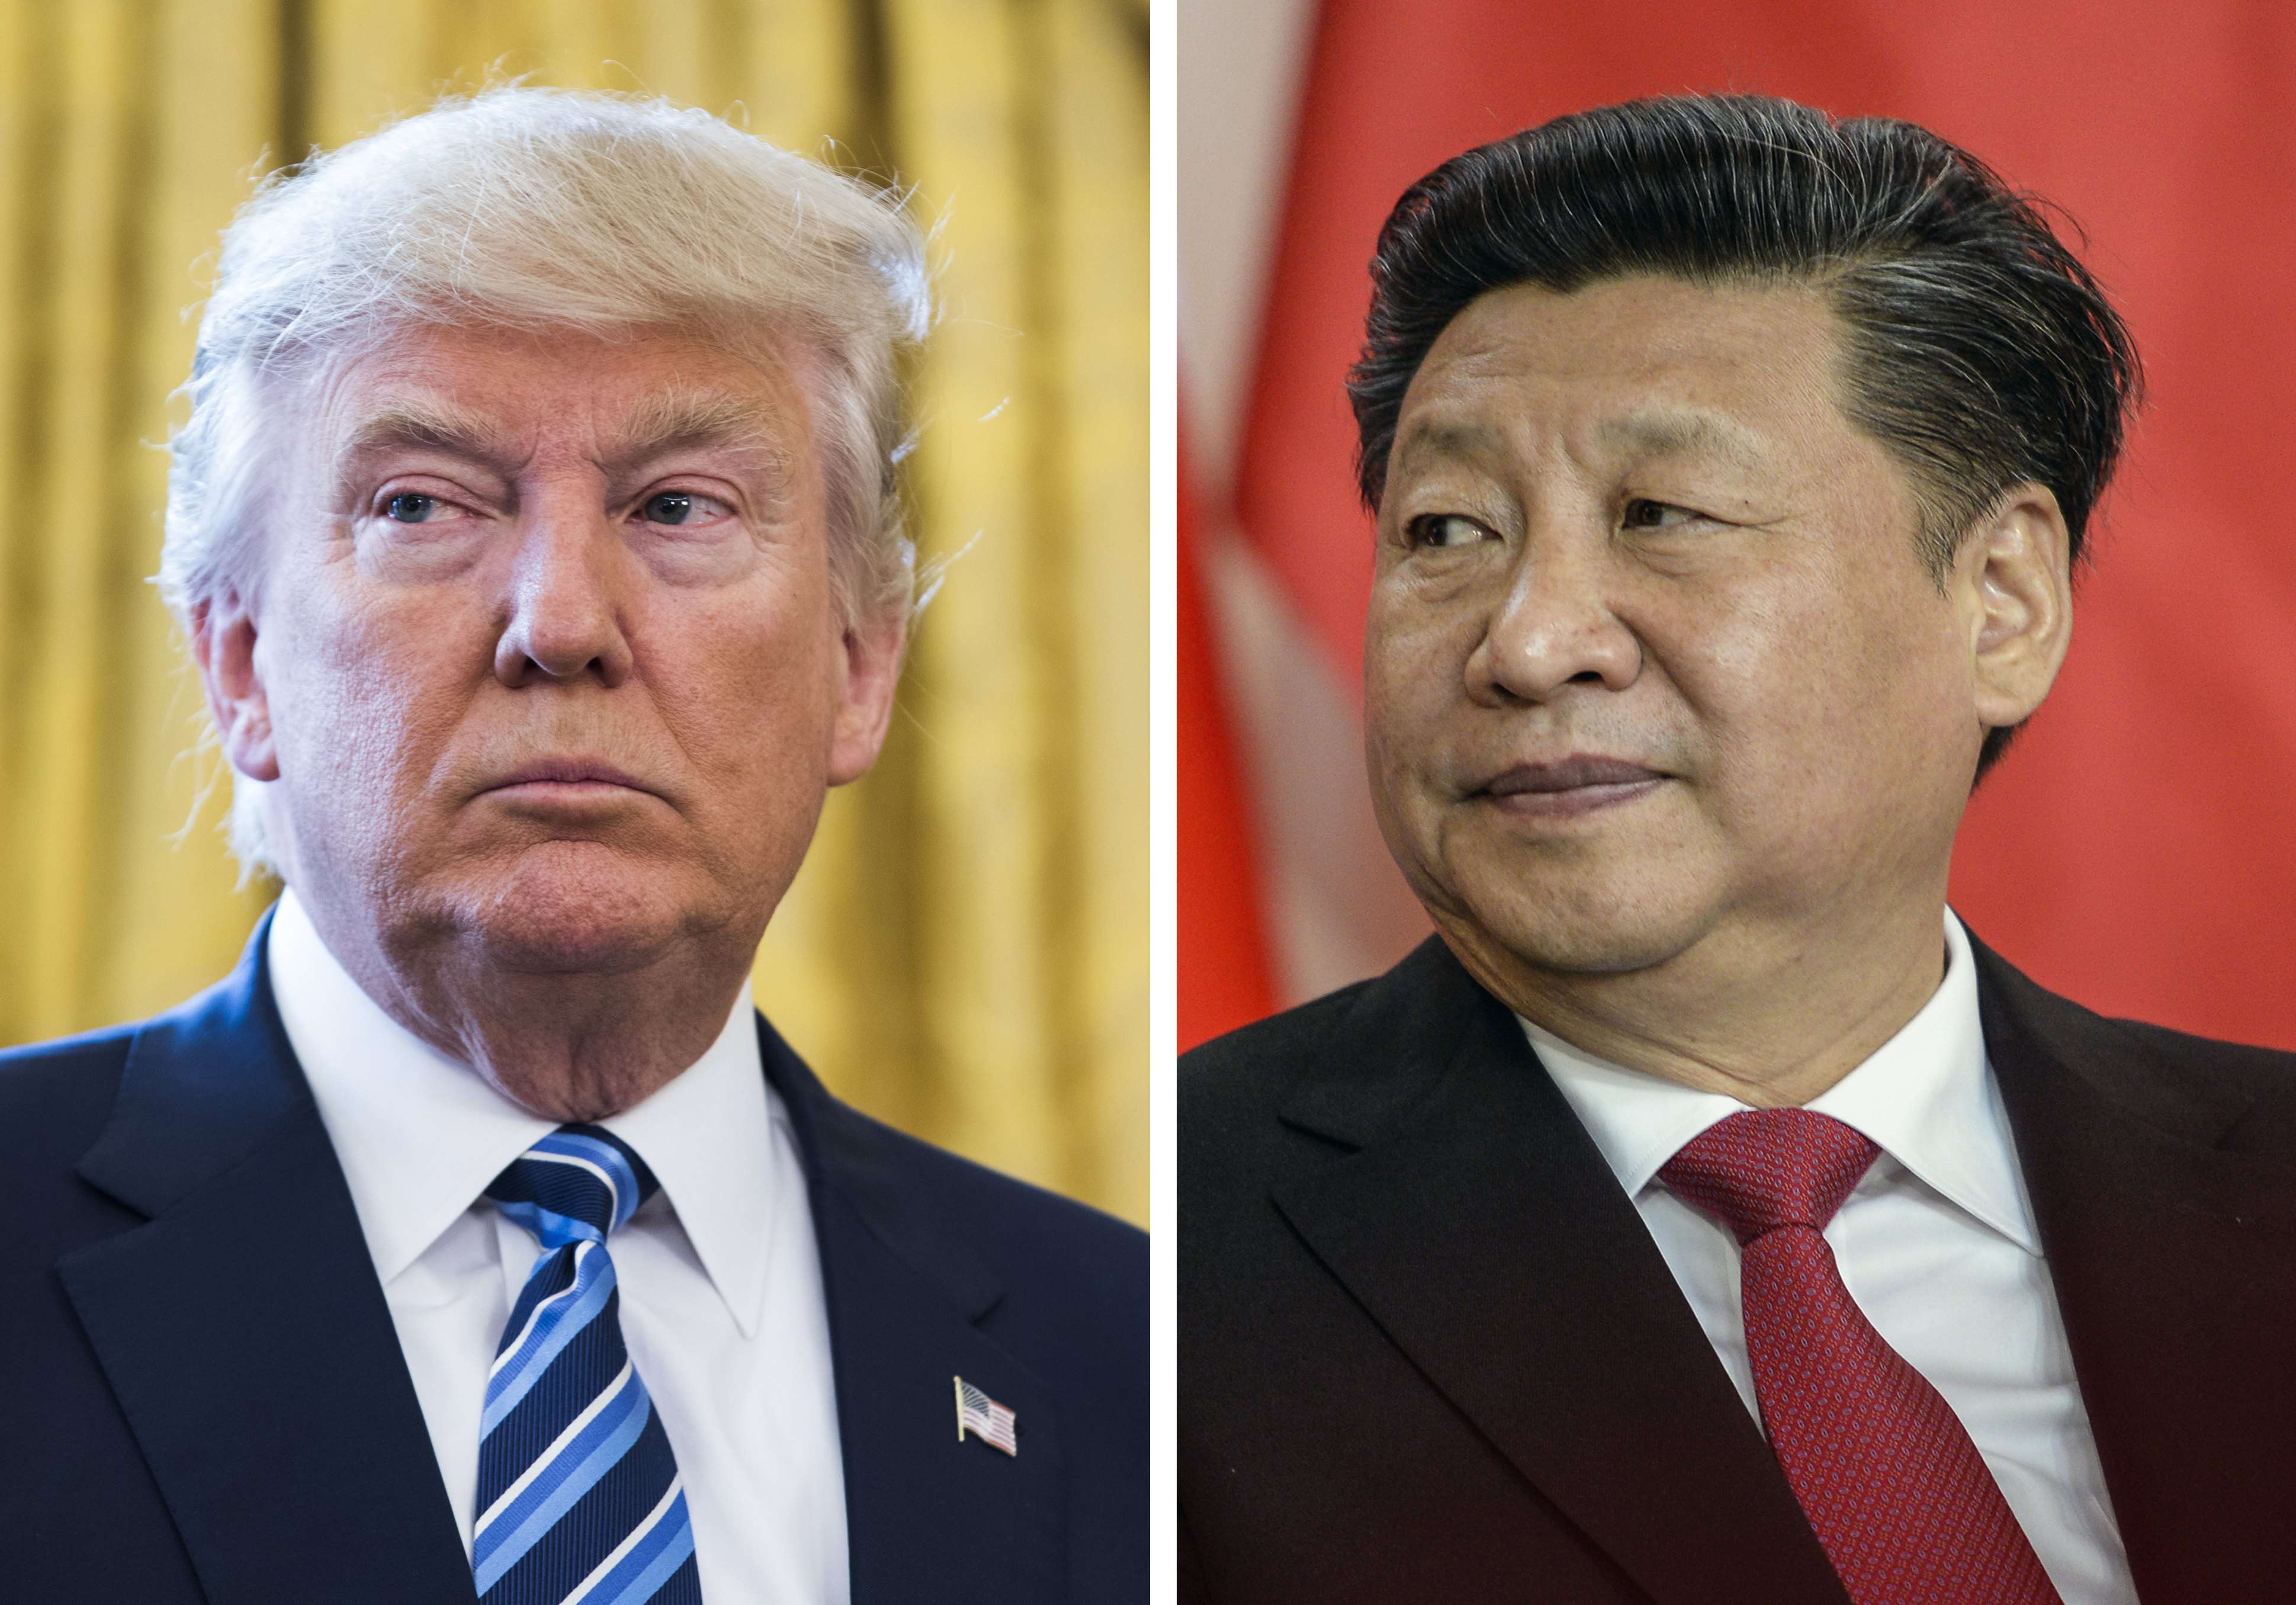 US President Donald Trump intends to host Chinese leader Xi Jinping at his Florida resort next month, according to US media reports. Photo: EPA